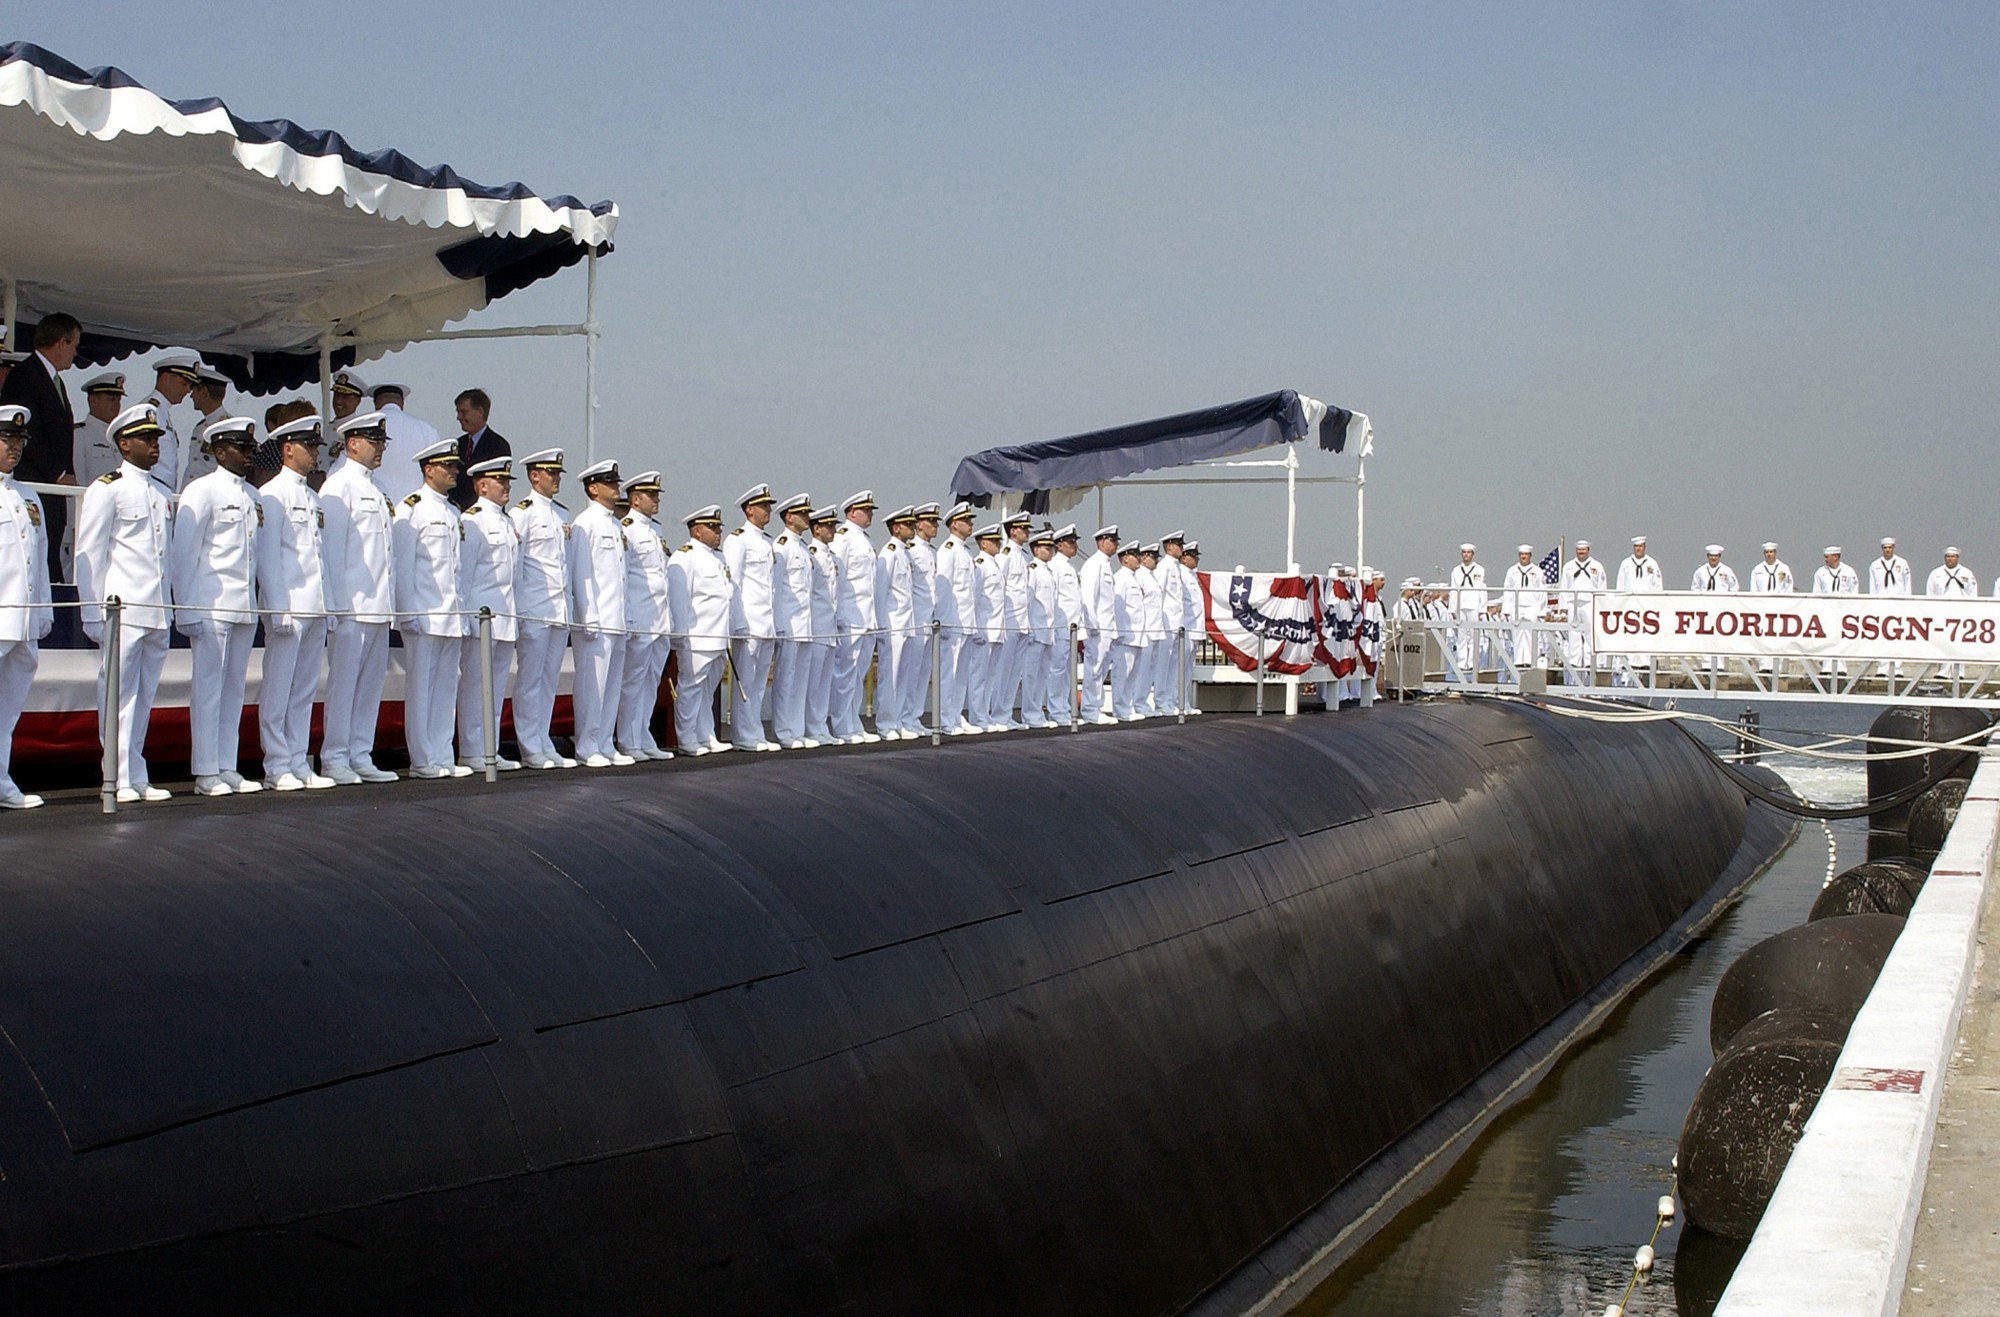 ssgn-728 uss florida guided missile submarine us navy 2006 37 recommissioning mayport